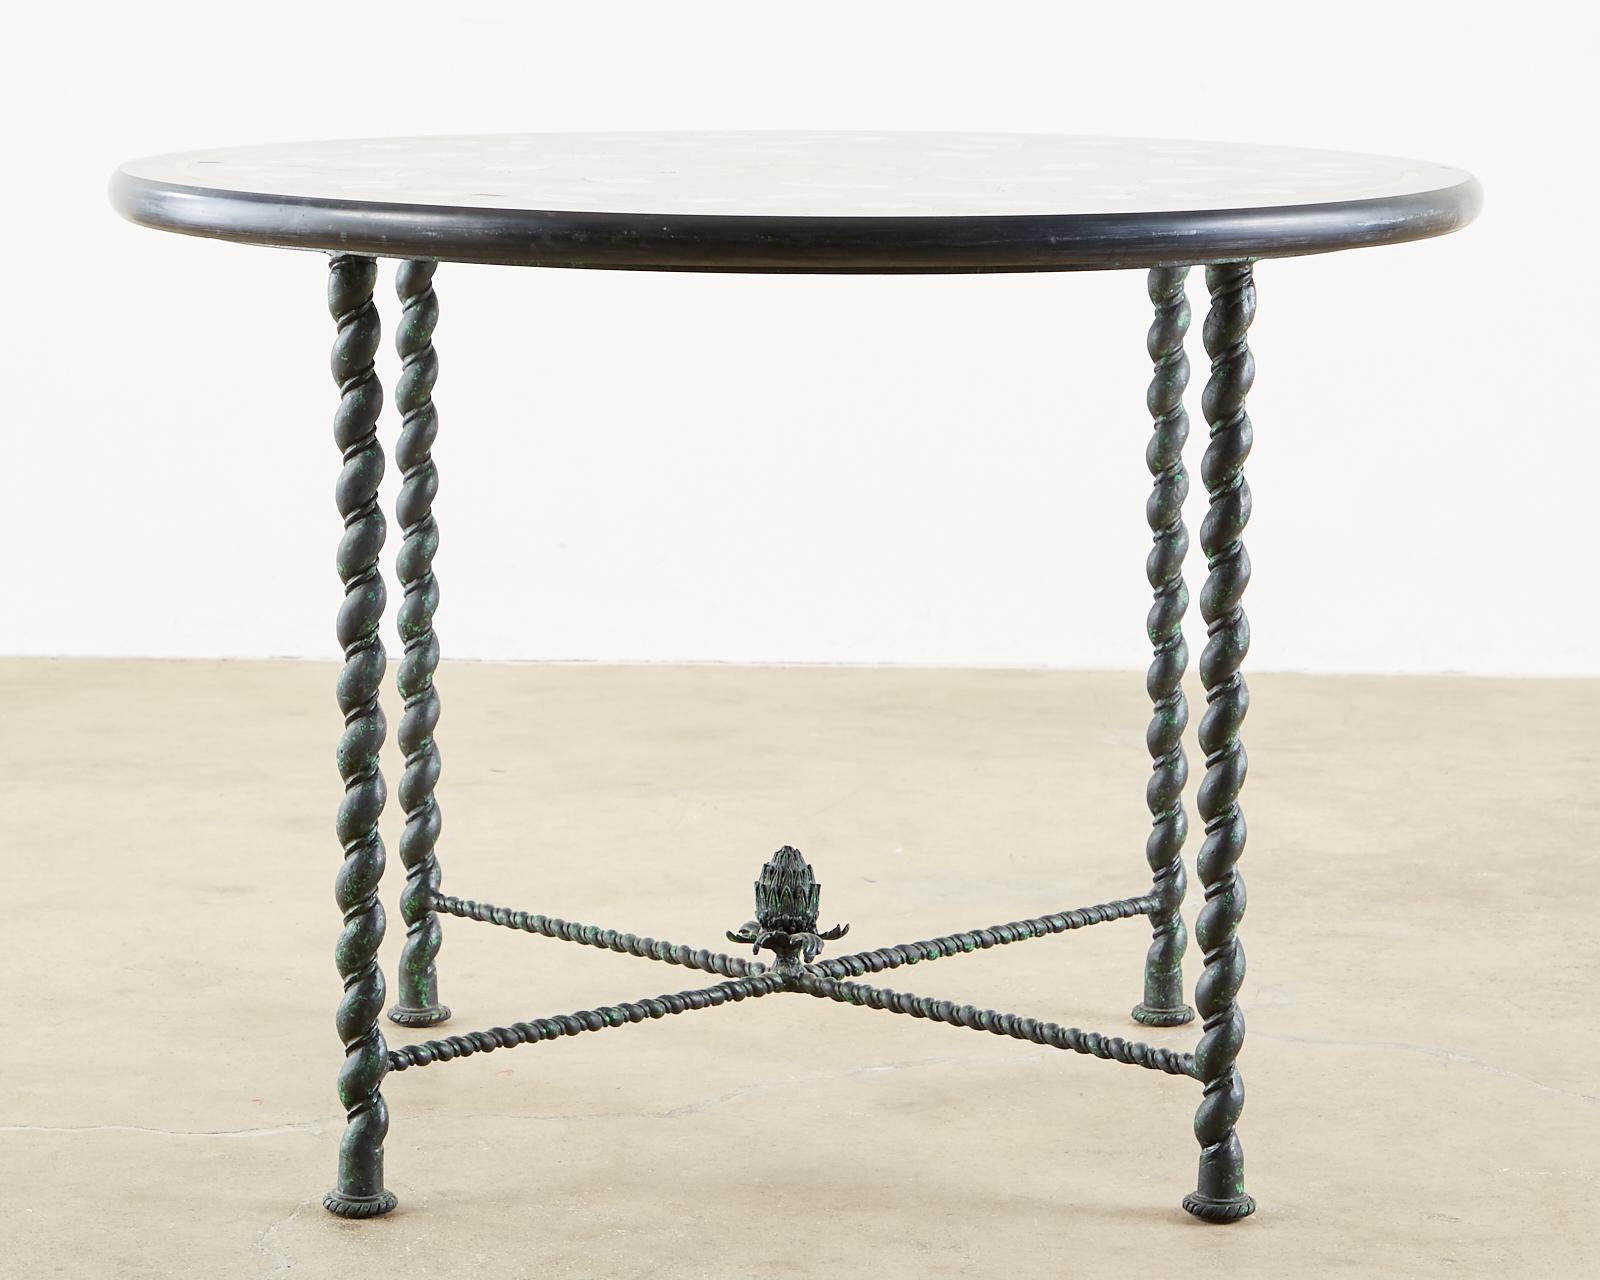 Stunning Italian centre or garden table featuring a pietra Dura marble, mosaic inlay top. The marble top is 1.5 inches thick decorated with colorful floral reserves over a dramatic black ground. The round marble top has a bull nose edge and is